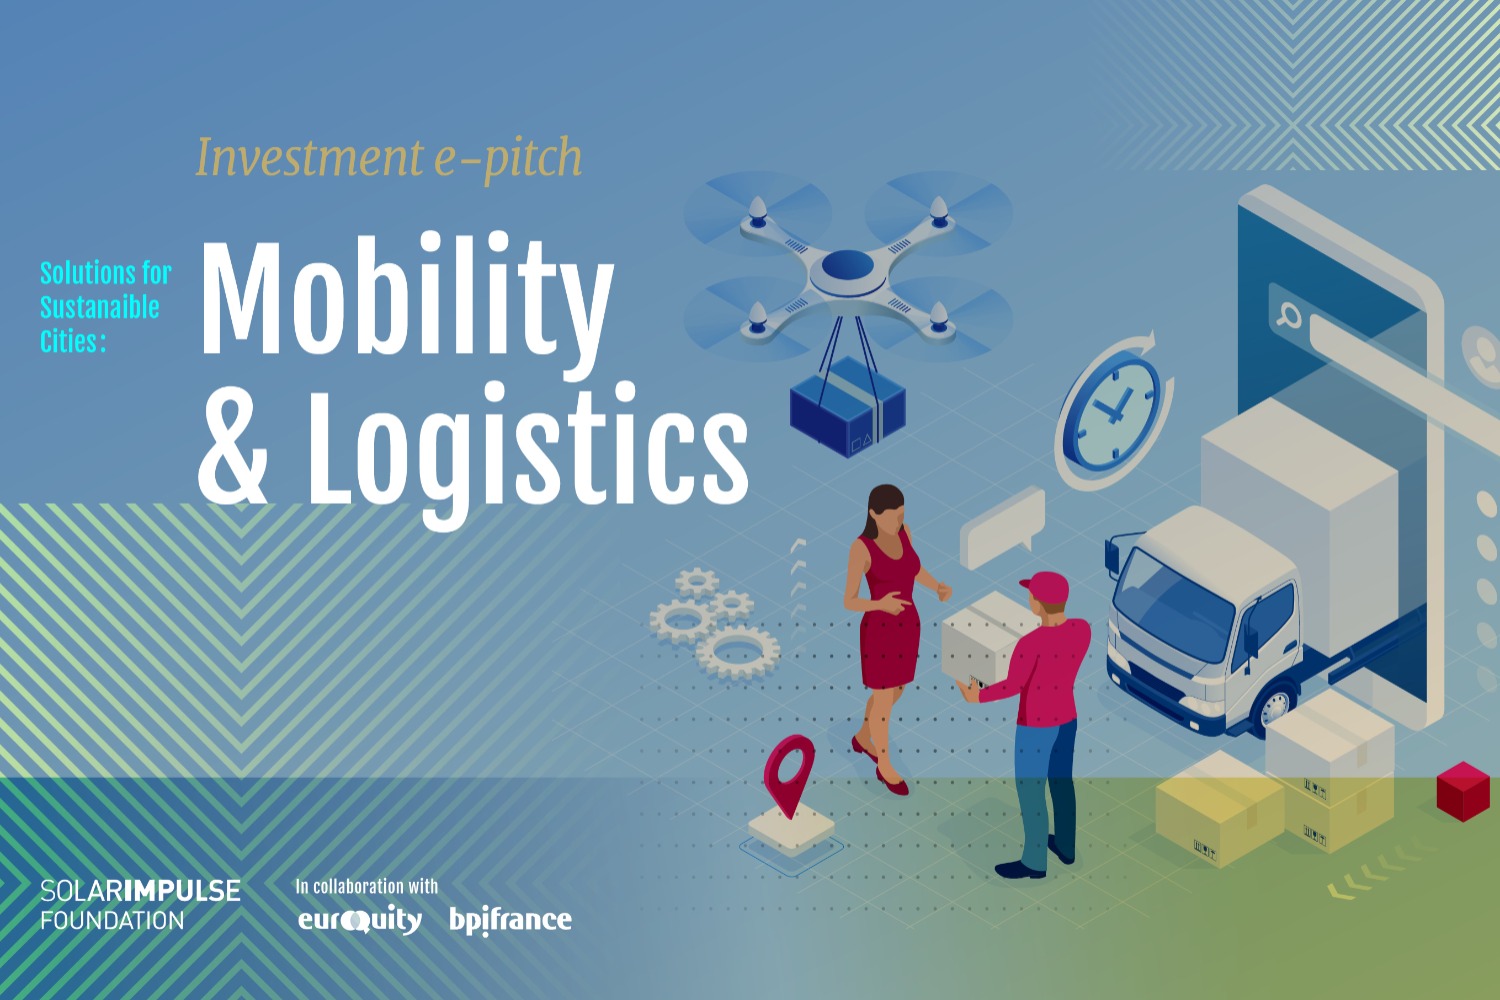 Investing in Solutions for Cities: Mobility & Logistics